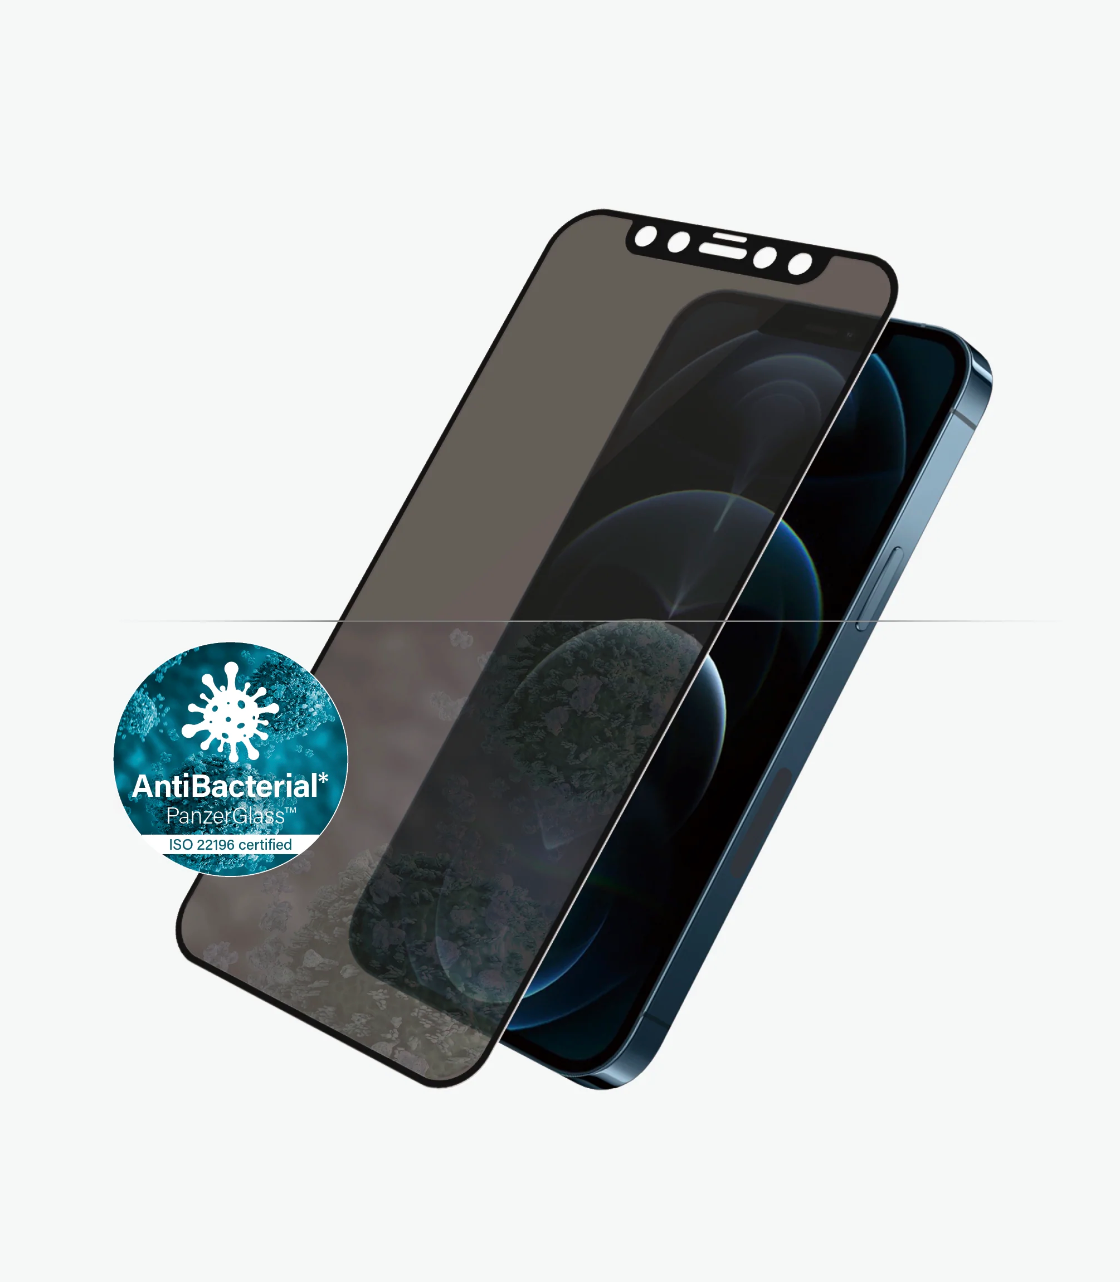 PanzerGlass Case Friendly 2.5D Privacy Tempered Glass for iPhone 12 mini (Black) 